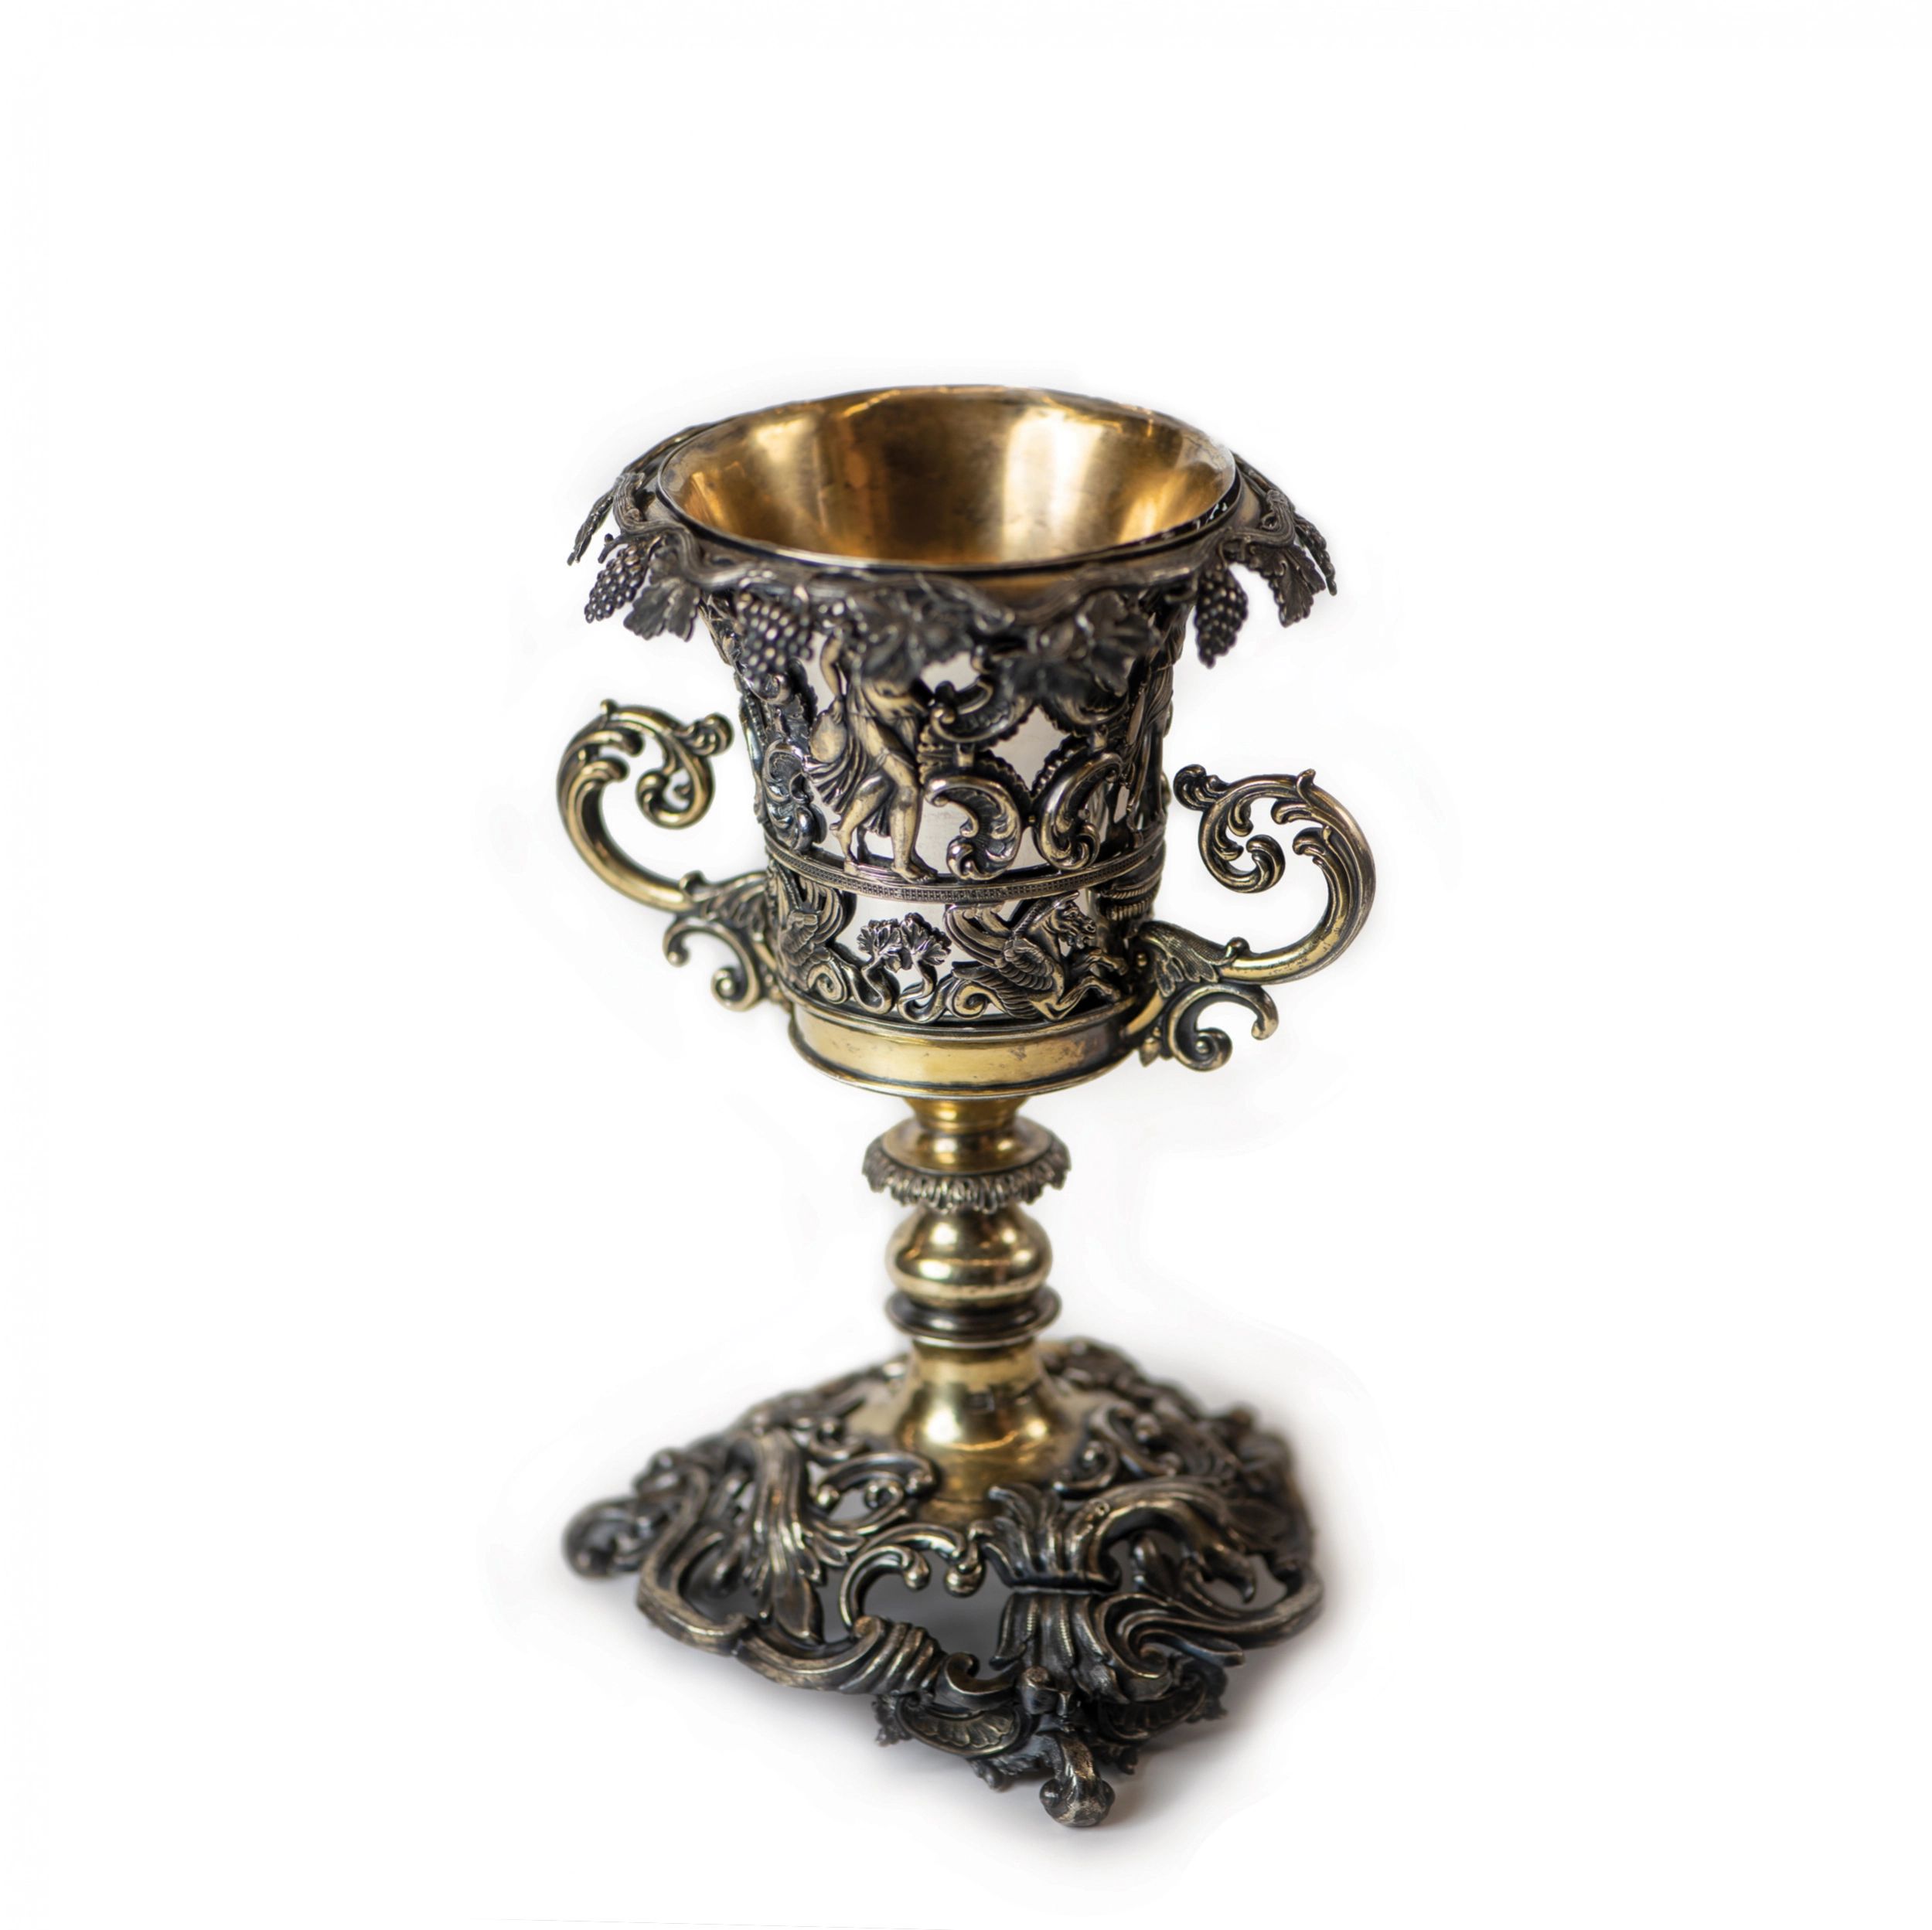 Silver Goblet. Imperial Russia